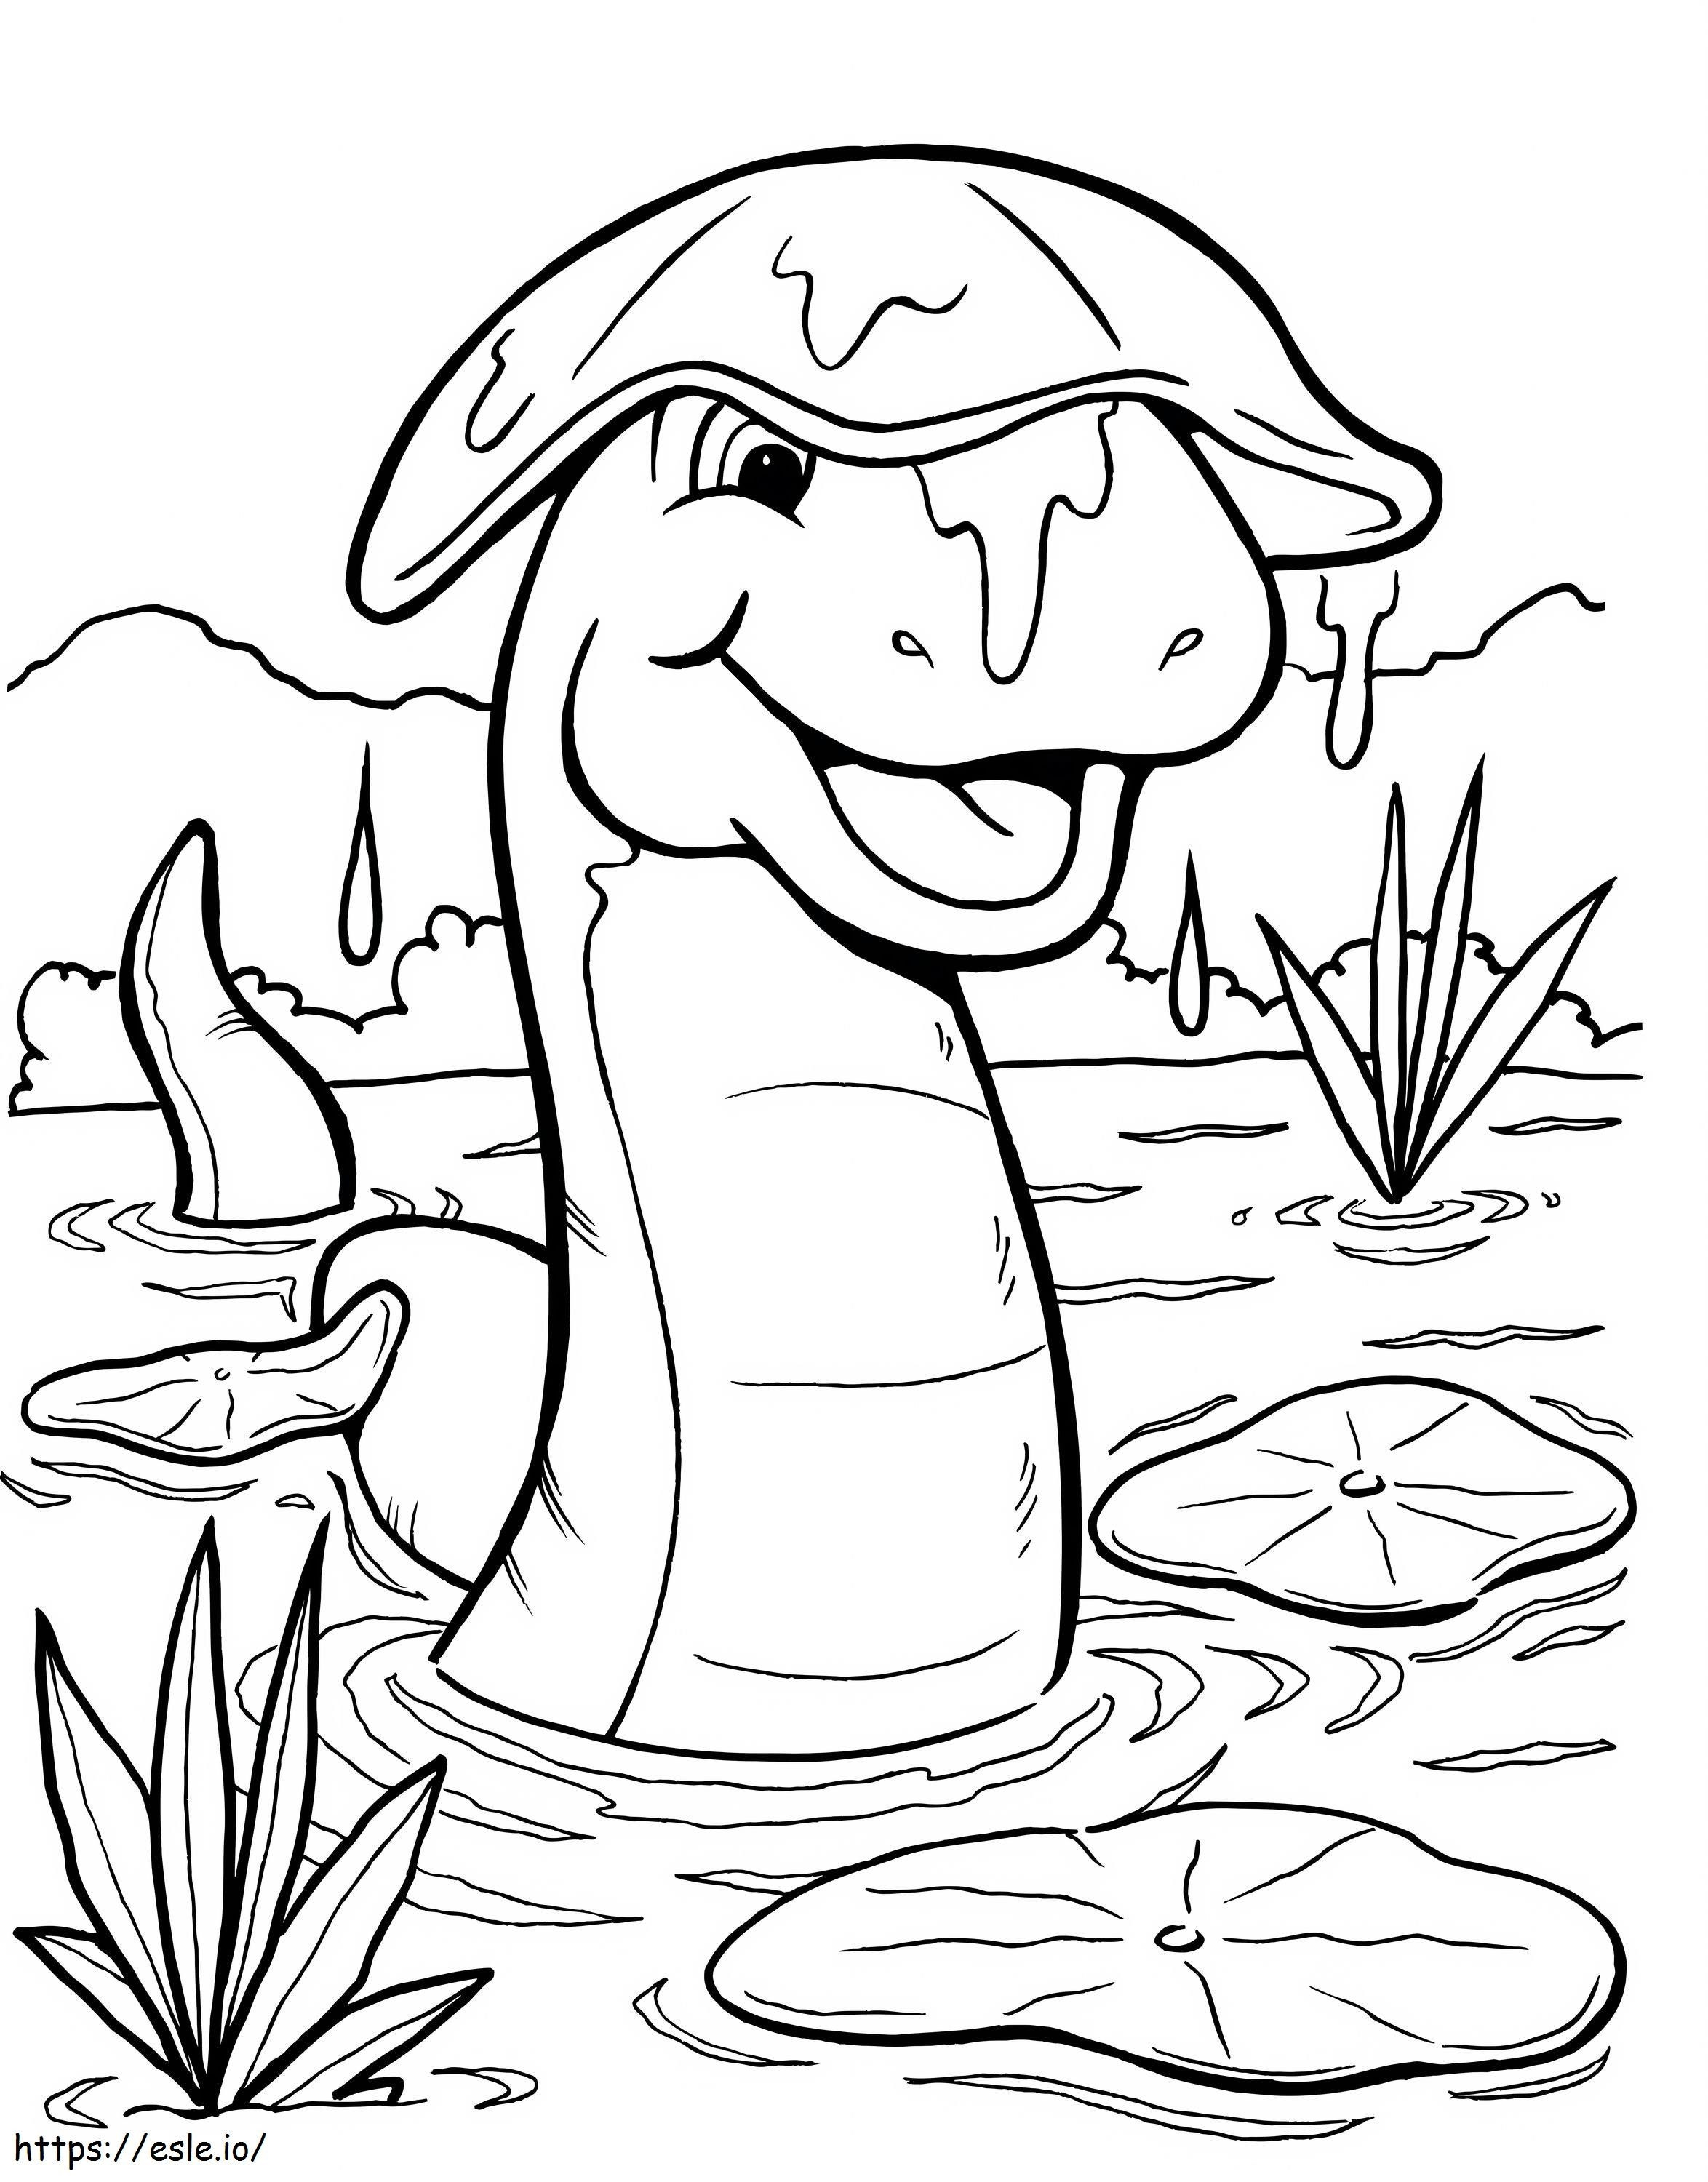 Lily Pad And Snake coloring page